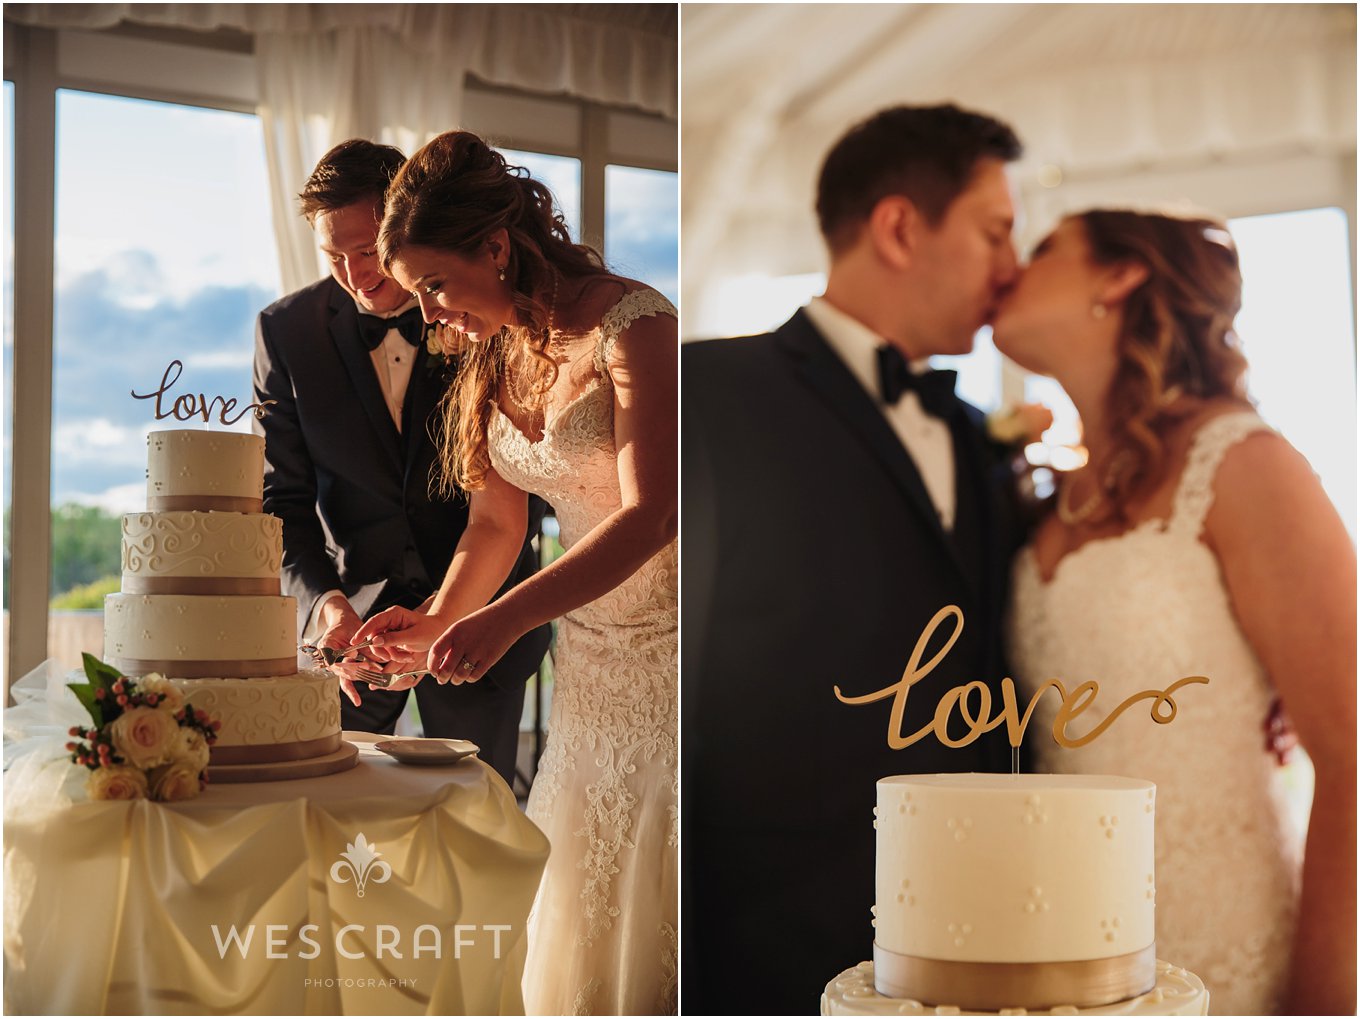 I just loved Jenny & Michael's cake topper. The sun beamed in during sunset as they cut their cake.